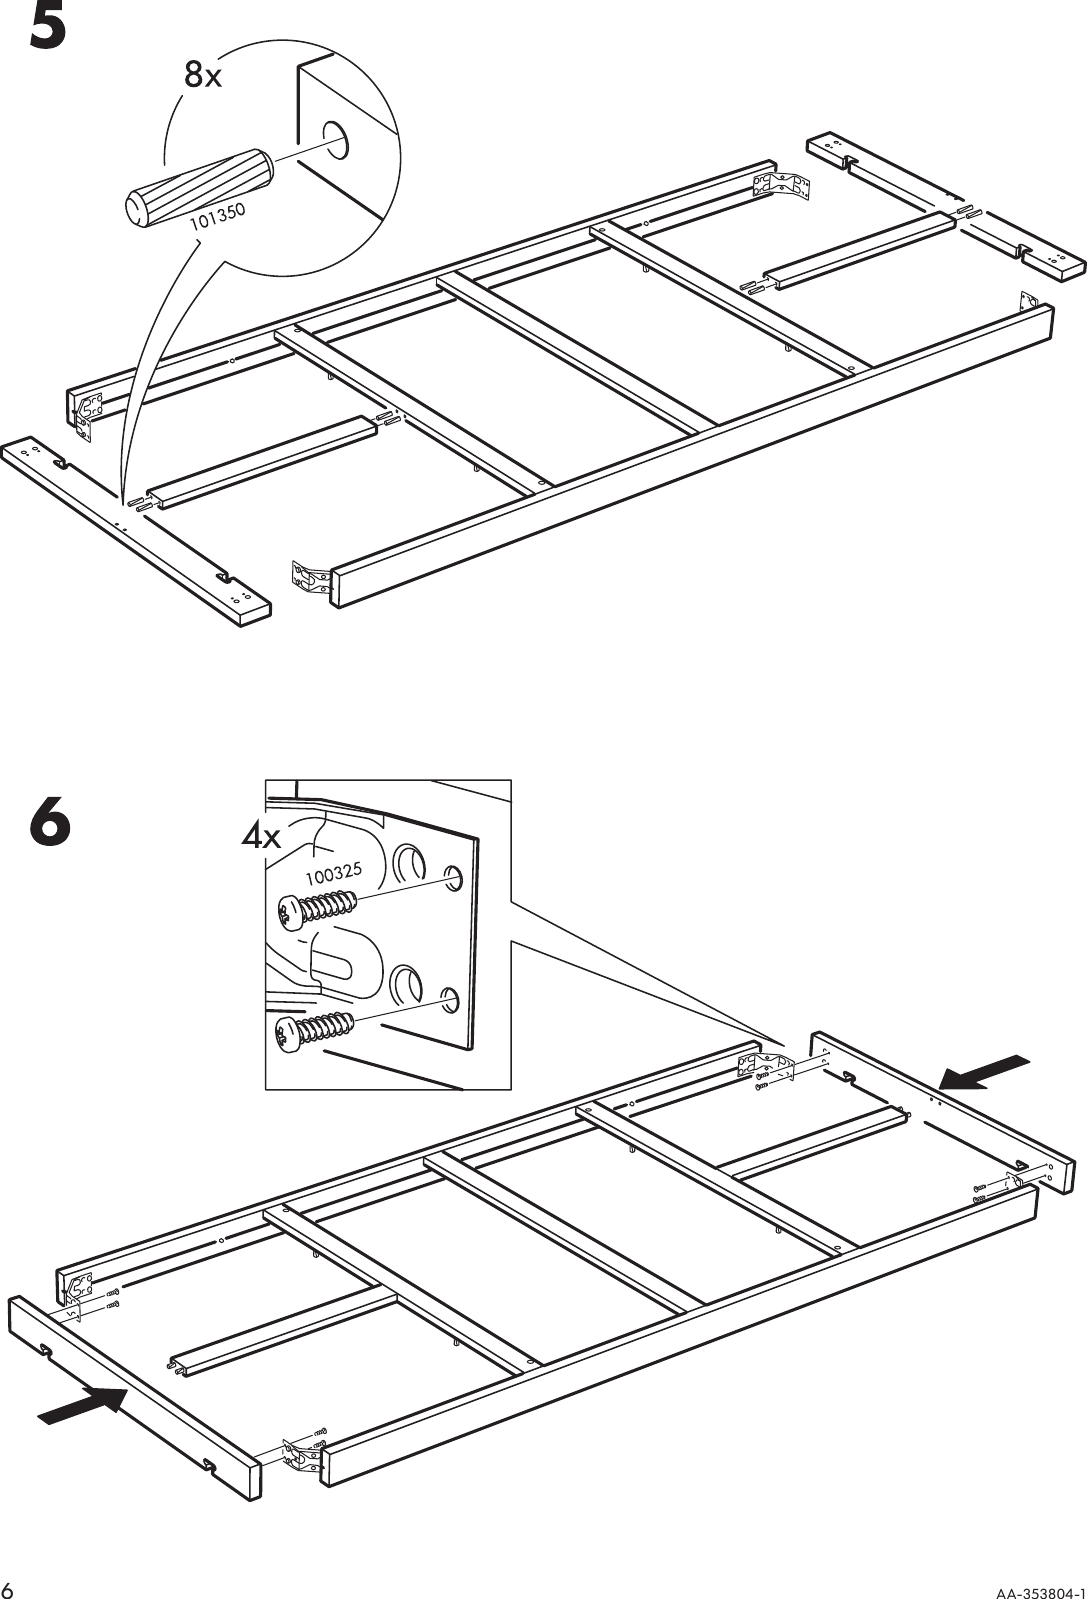 Page 6 of 12 - Ikea Ikea-Bjursta-Extendable-Dining-Table-94-114-133X43-Assembly-Instruction